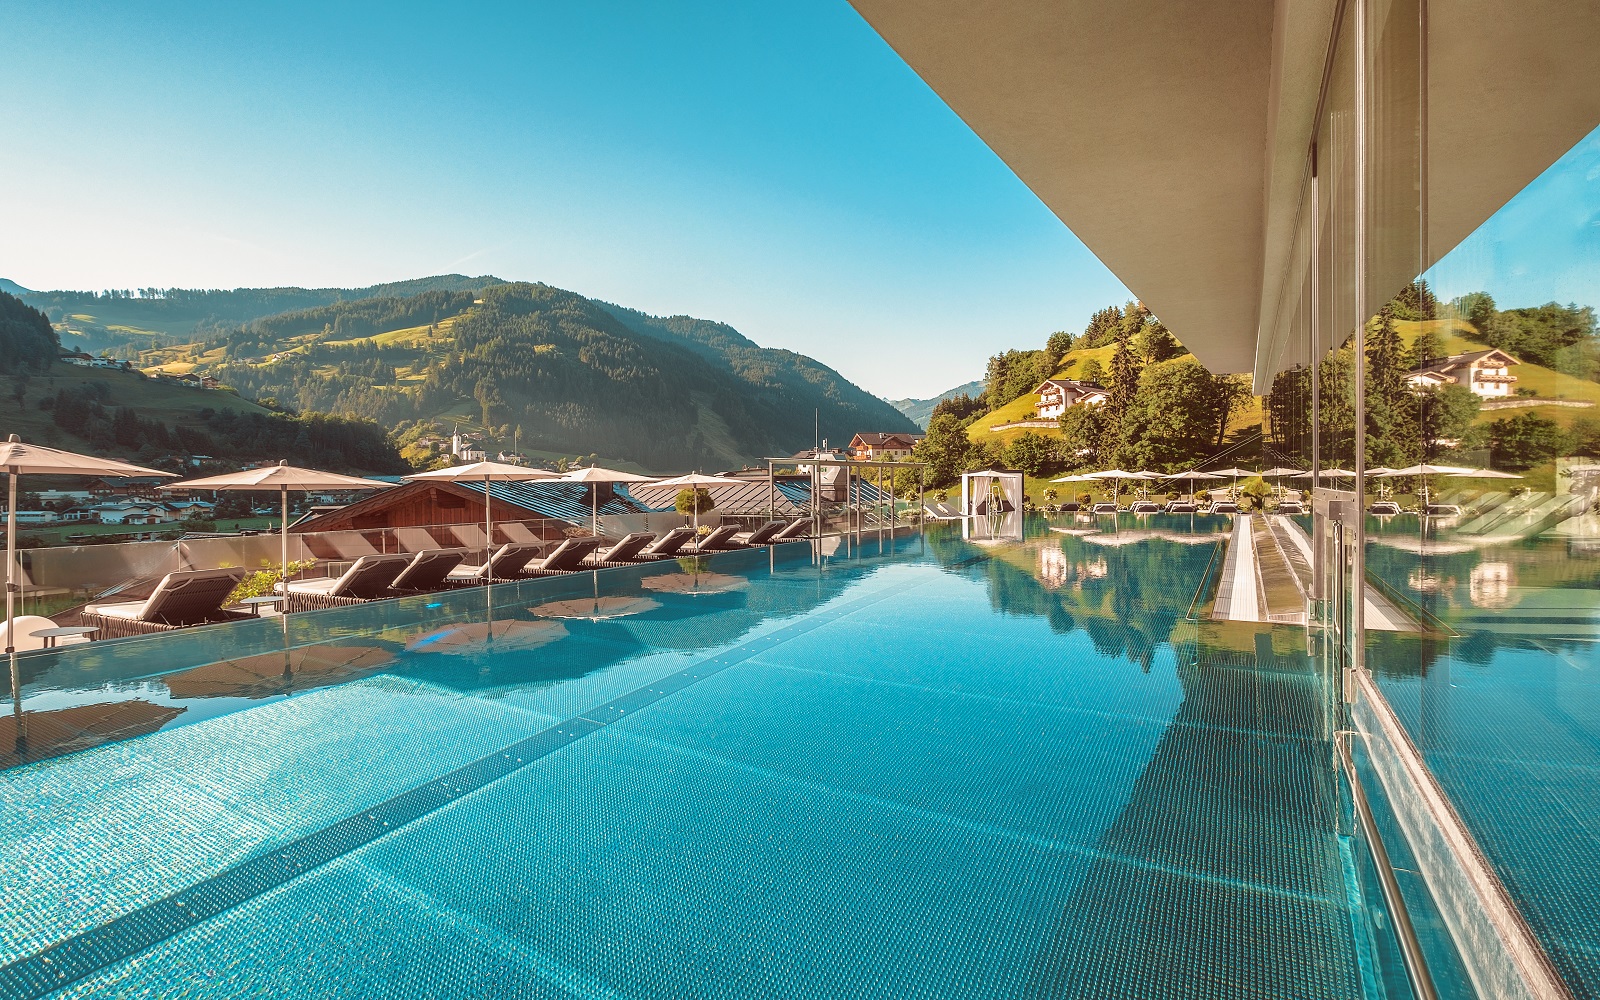 infinity pool and umbrellas at Das Edelweiss